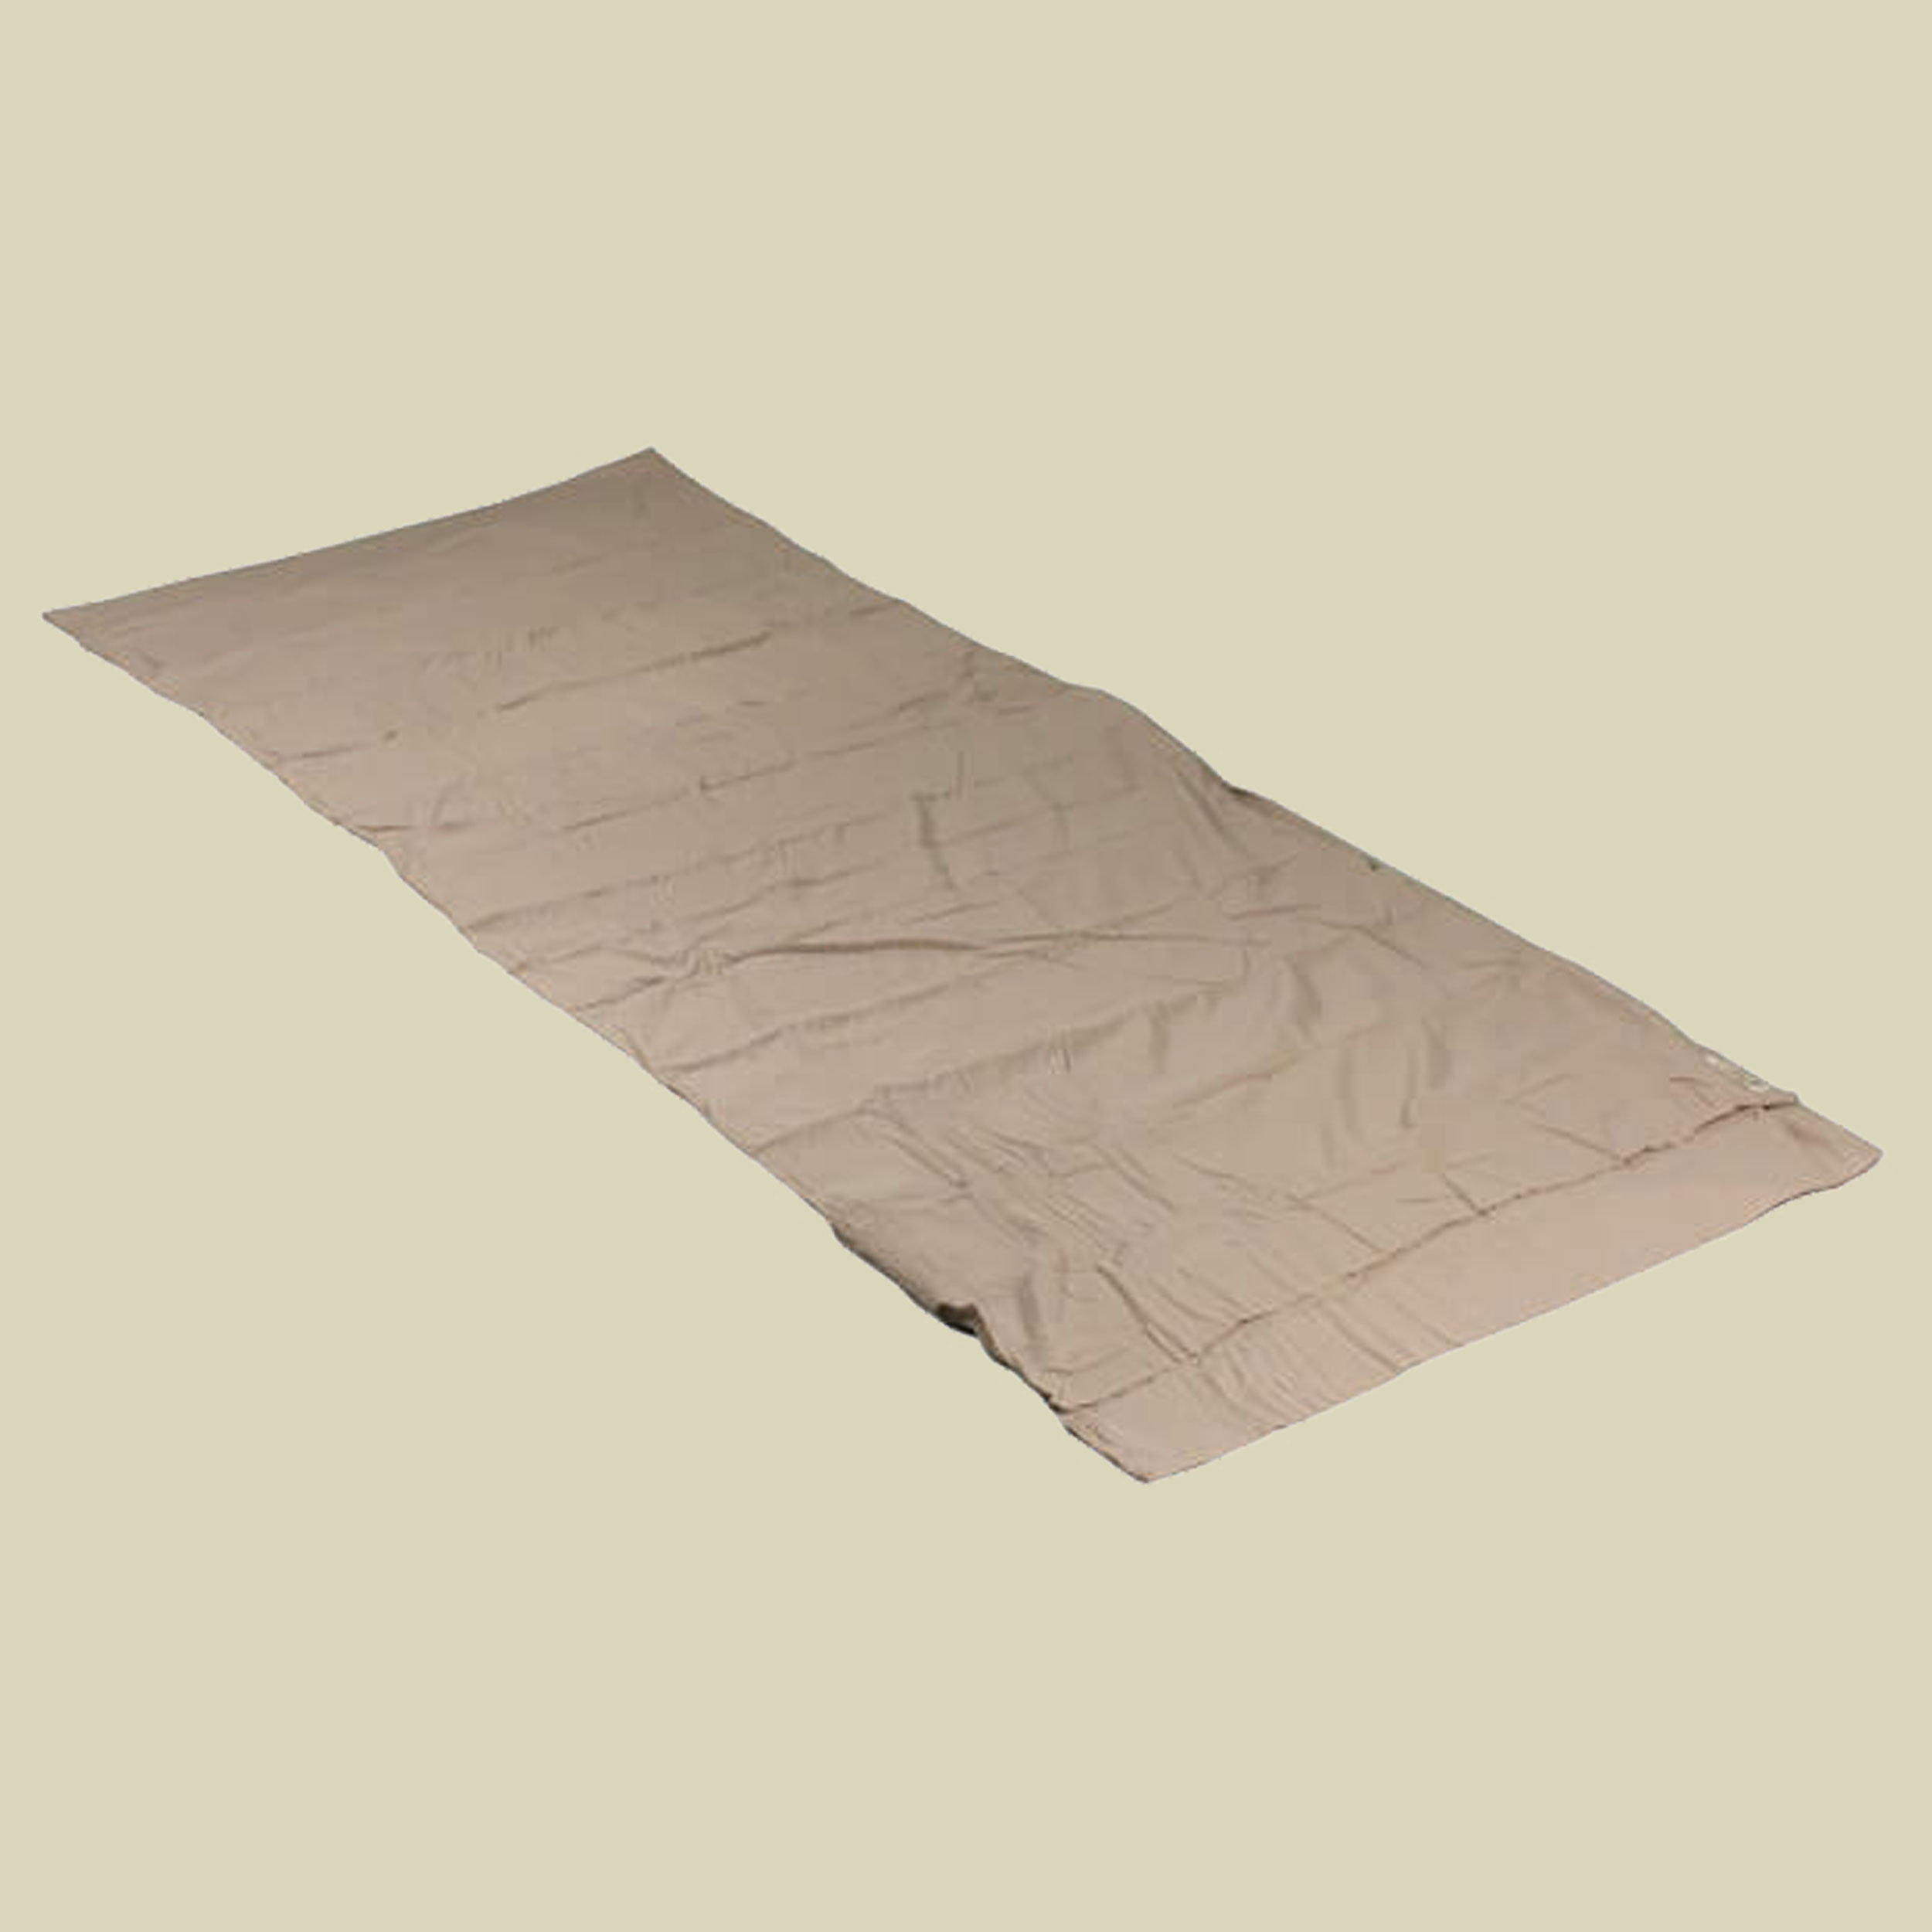 Insect Shield TravelSheet Egyptian Cotton Größe 210 x 82 cm Farbe sand